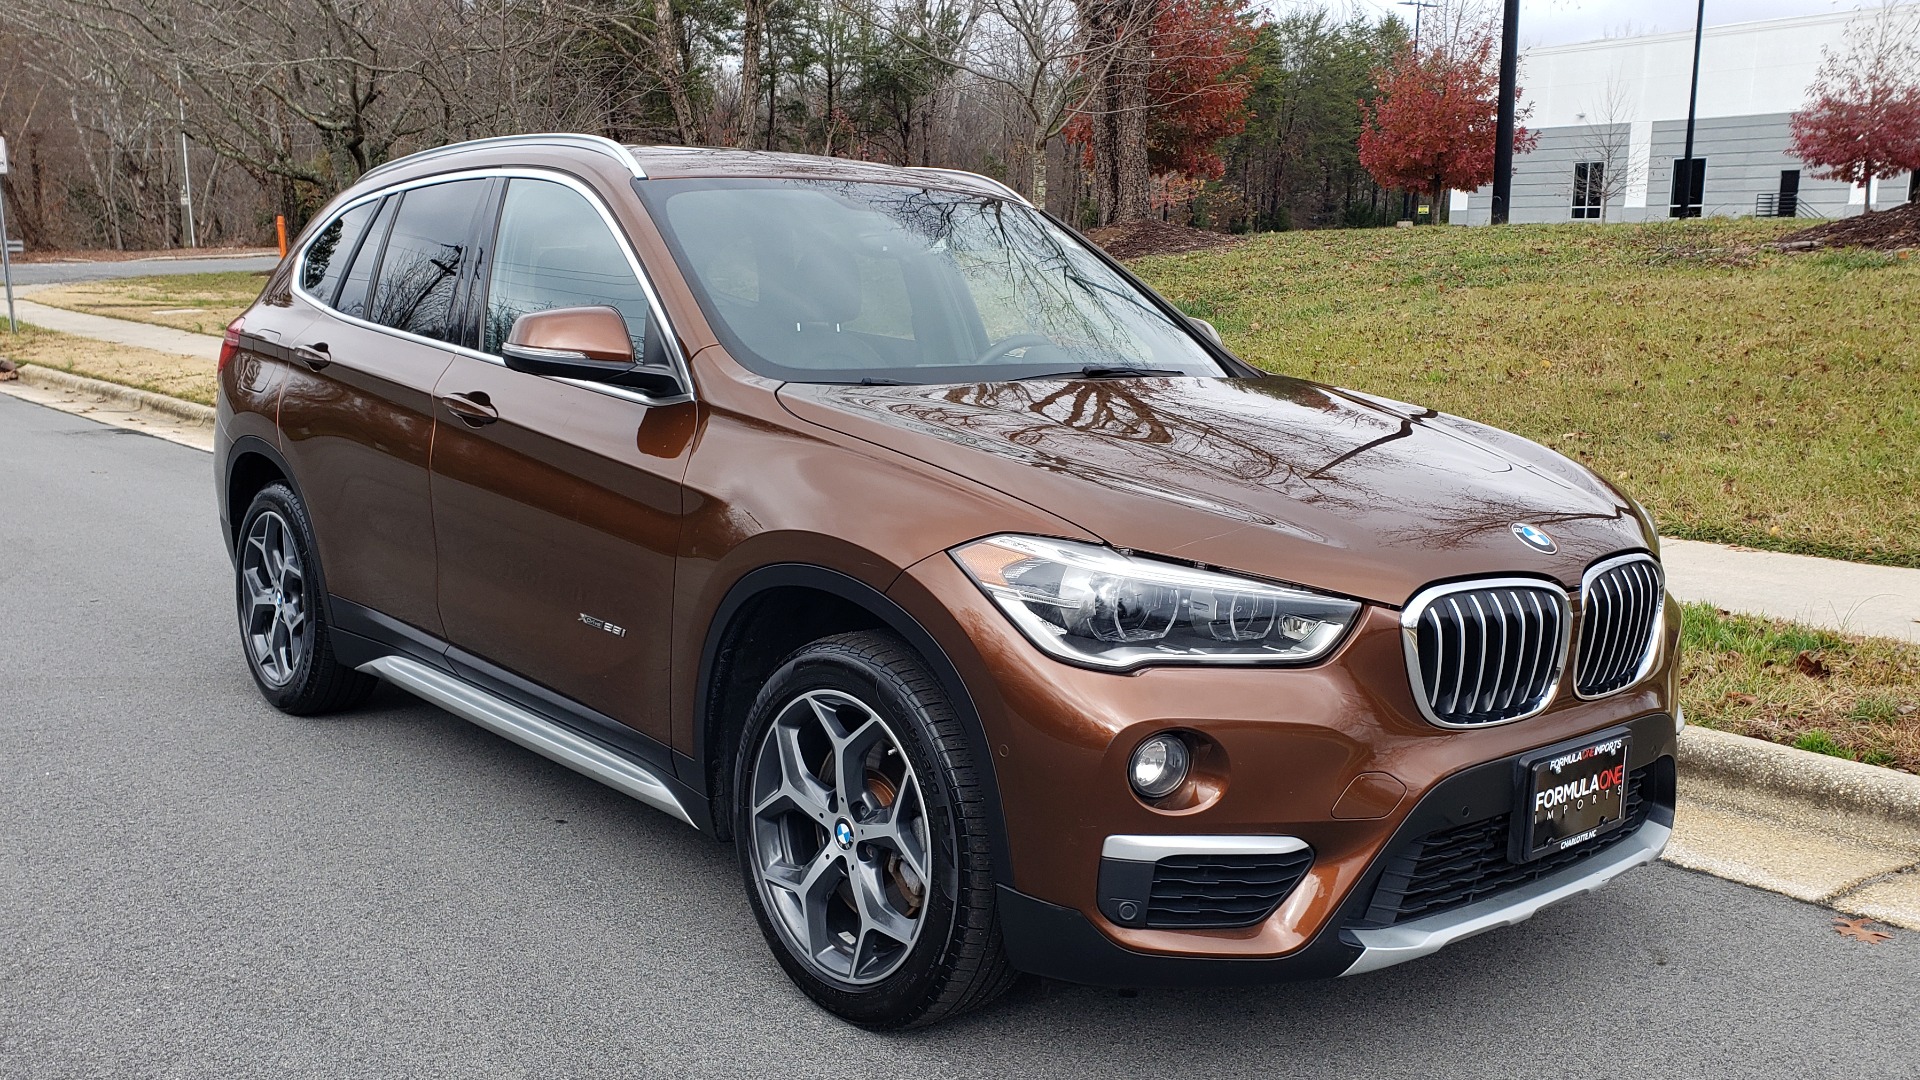 Used 2017 BMW X1 XDRIVE28I / PREM / TECH / DRVR ASST / COLD WTHR / REARVIEW for sale Sold at Formula Imports in Charlotte NC 28227 4